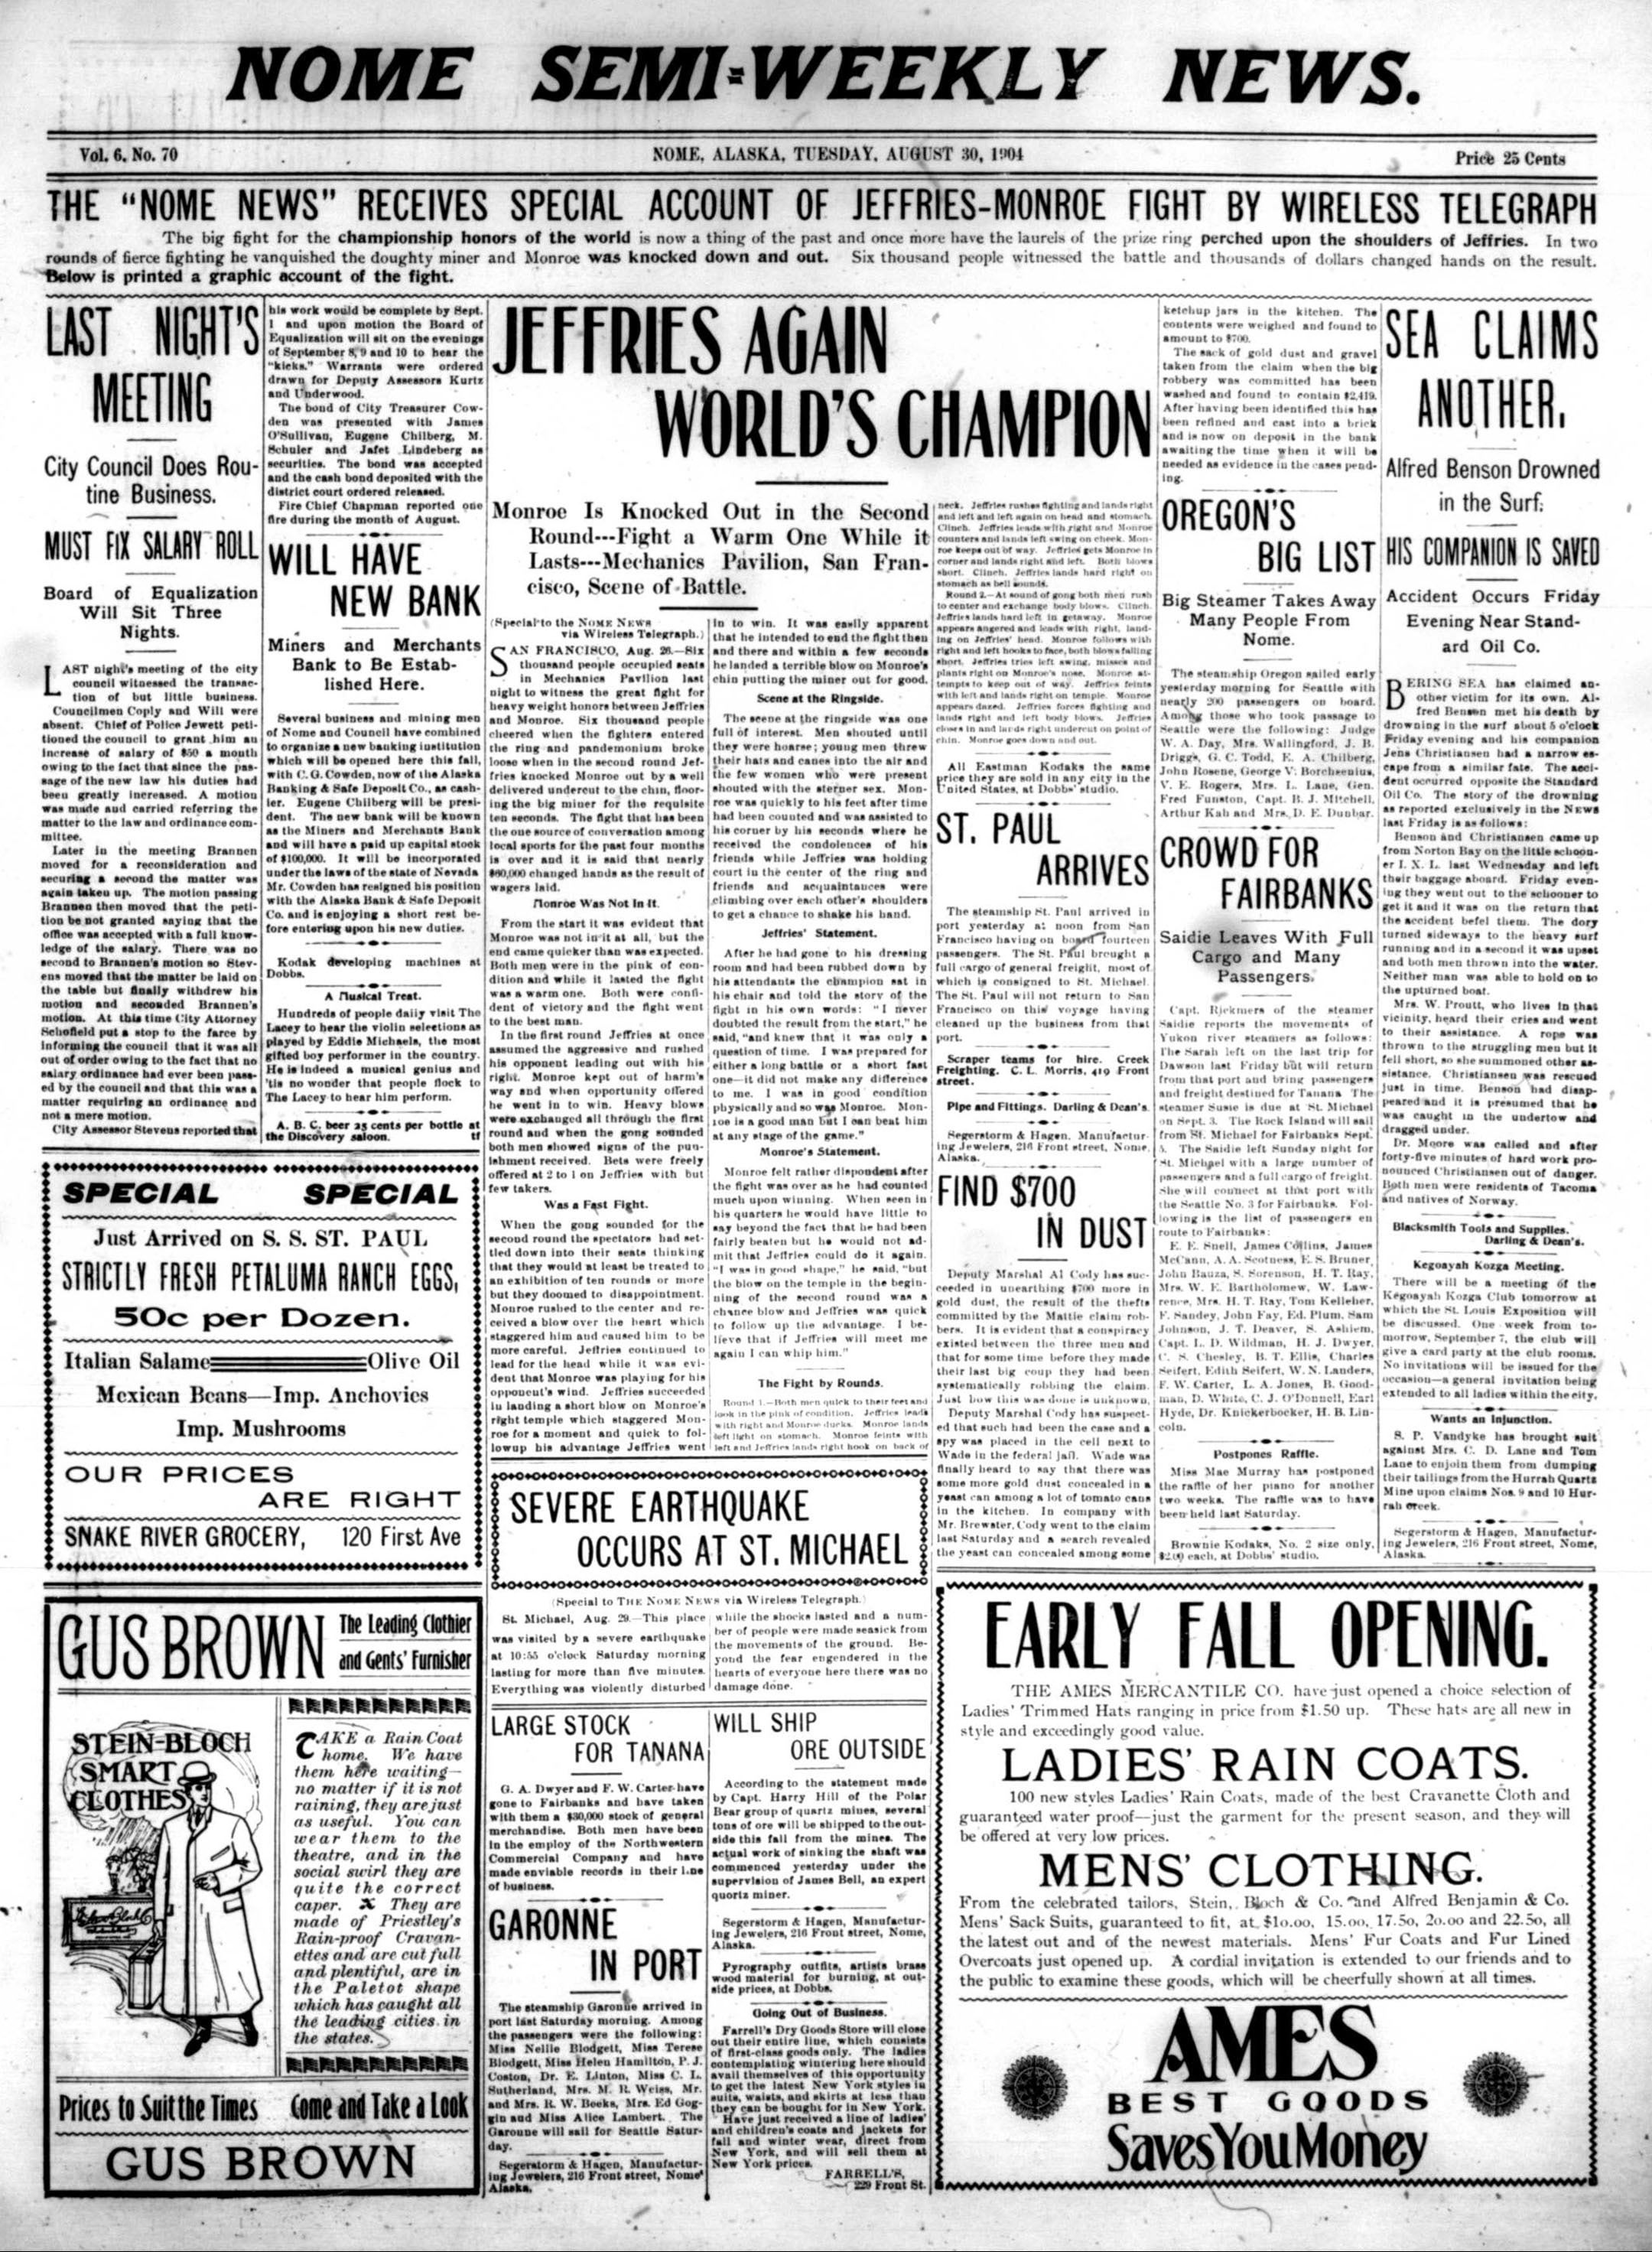 1904 August 30, Nome Semi-Weekly News (pg 1)